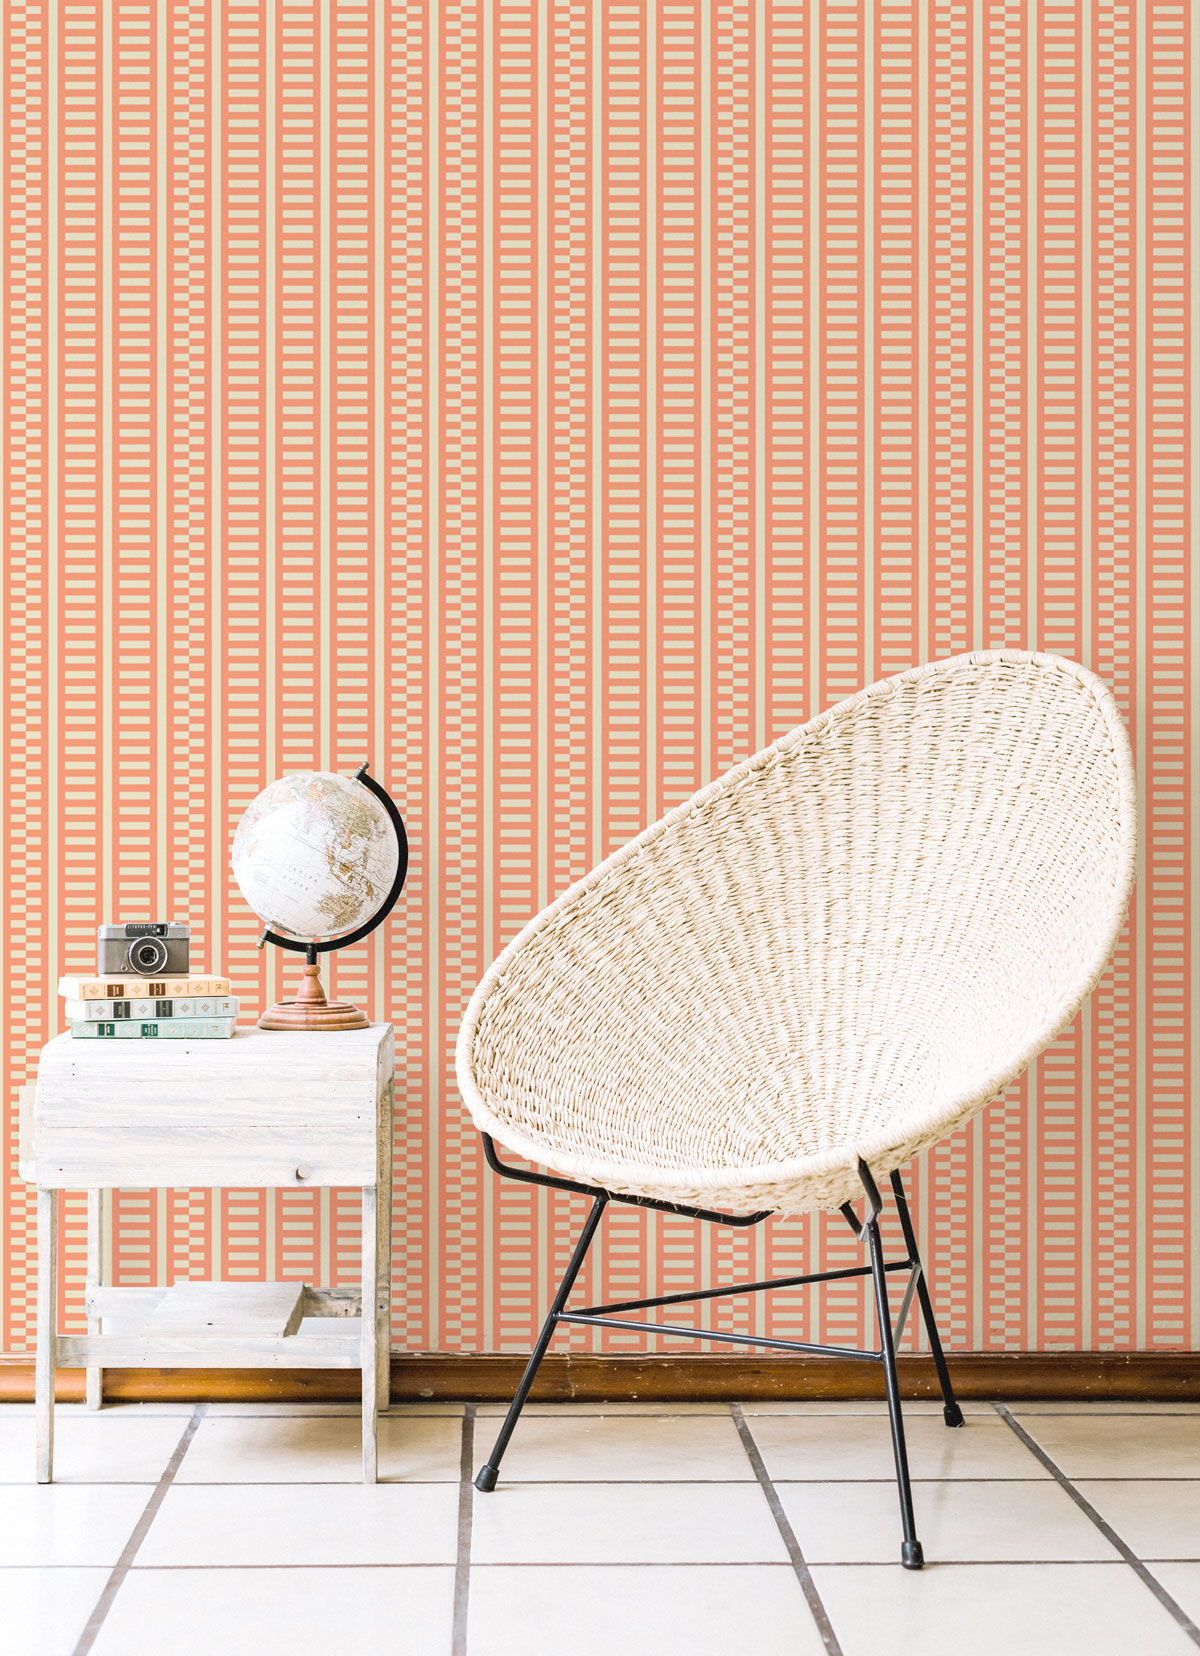 Shifted Stripes Wallpaper (Brick Red)